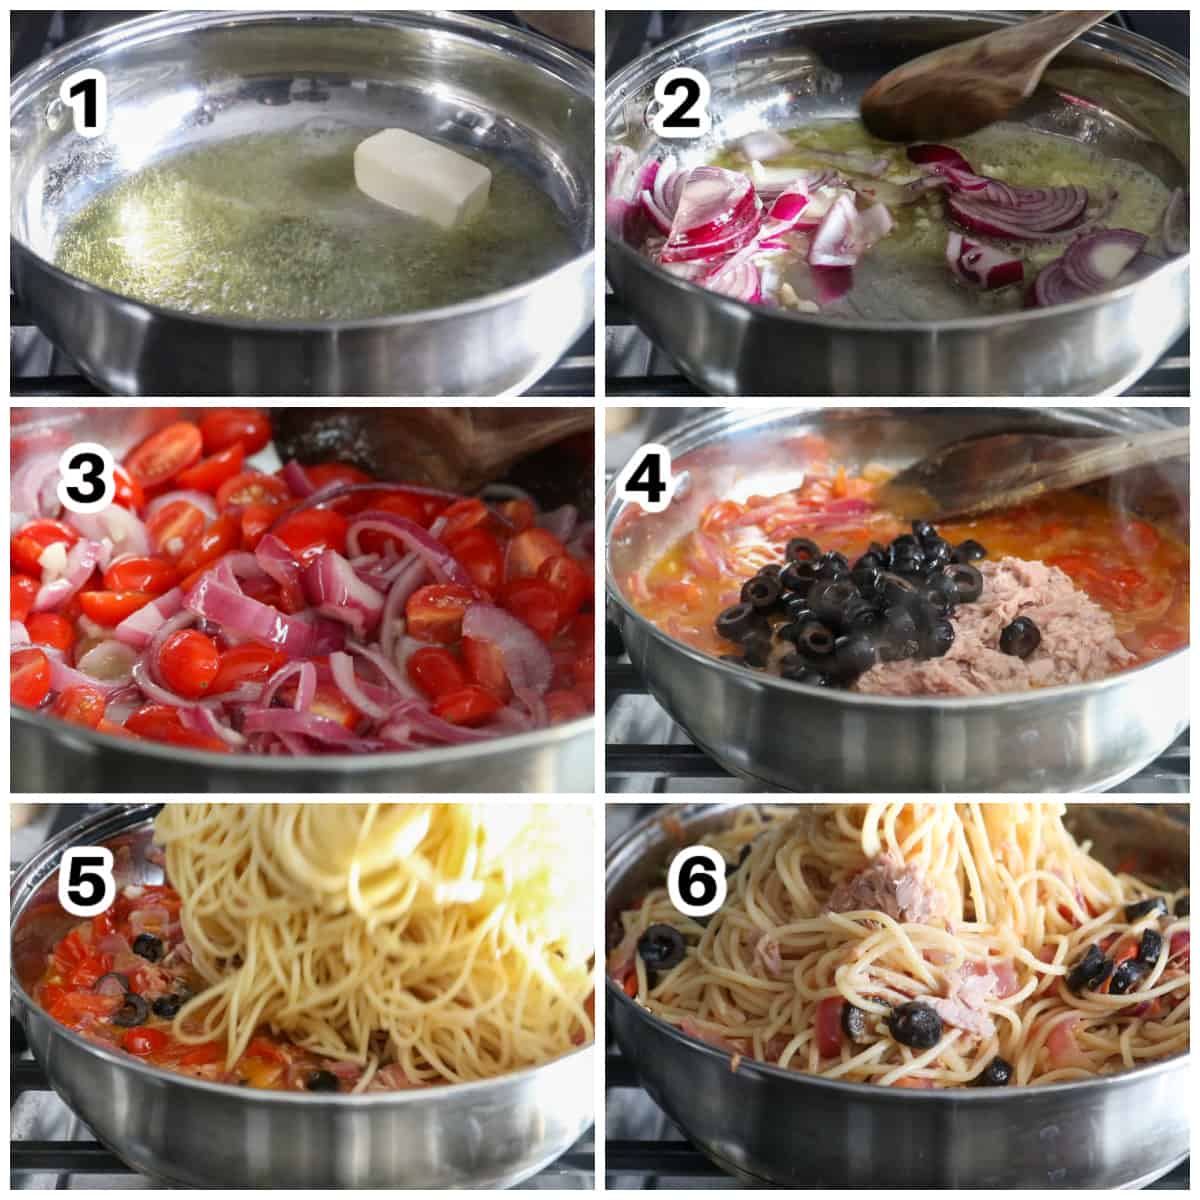 The process of making the Tuna Pasta.